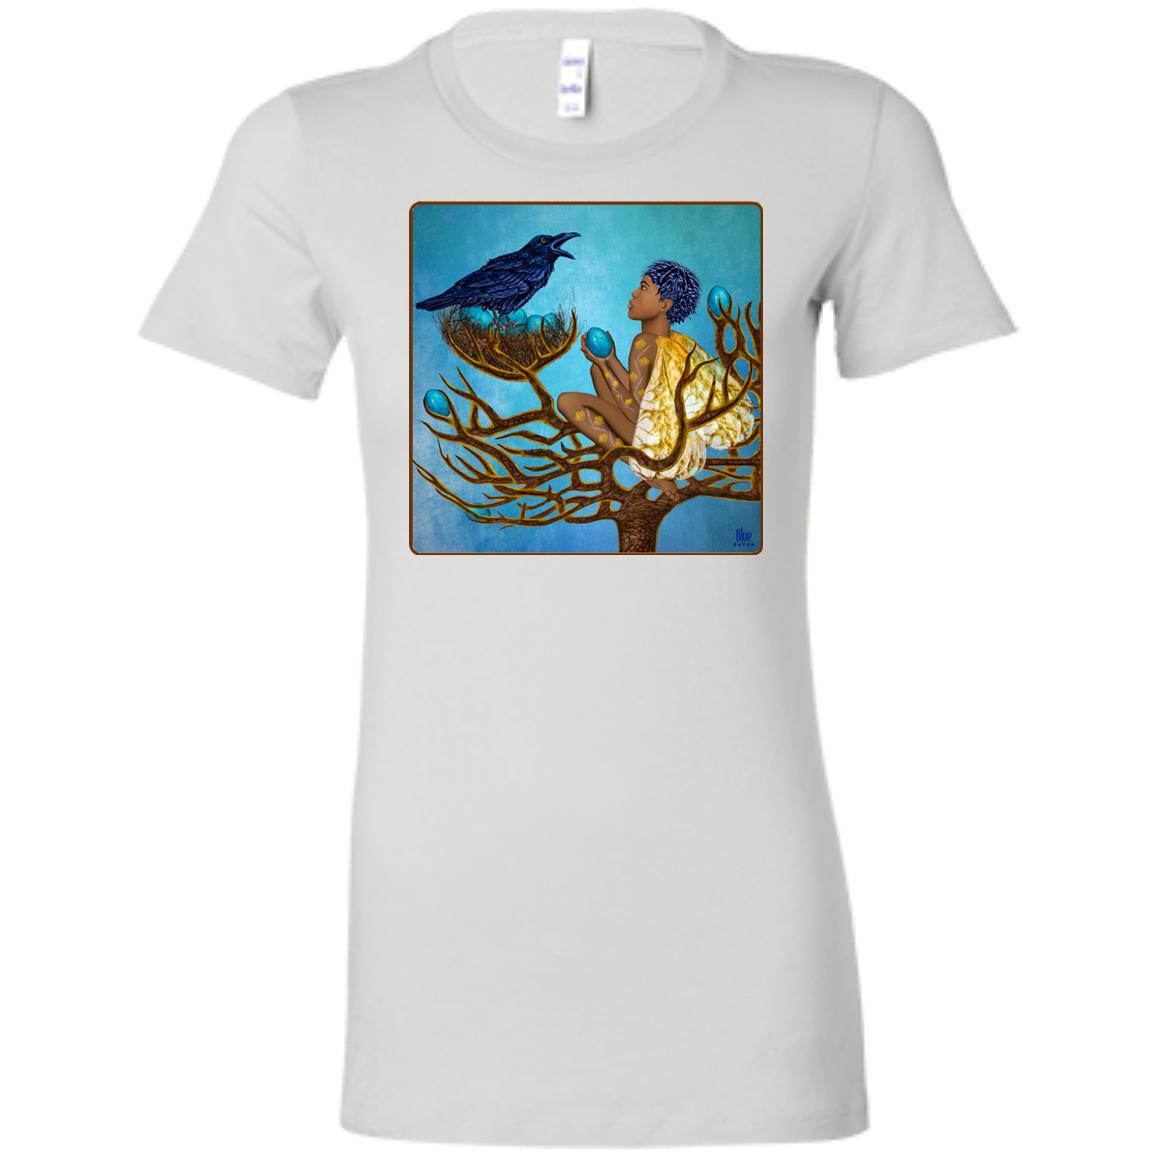 The blue raven's friend - Women's Fitted T-Shirt